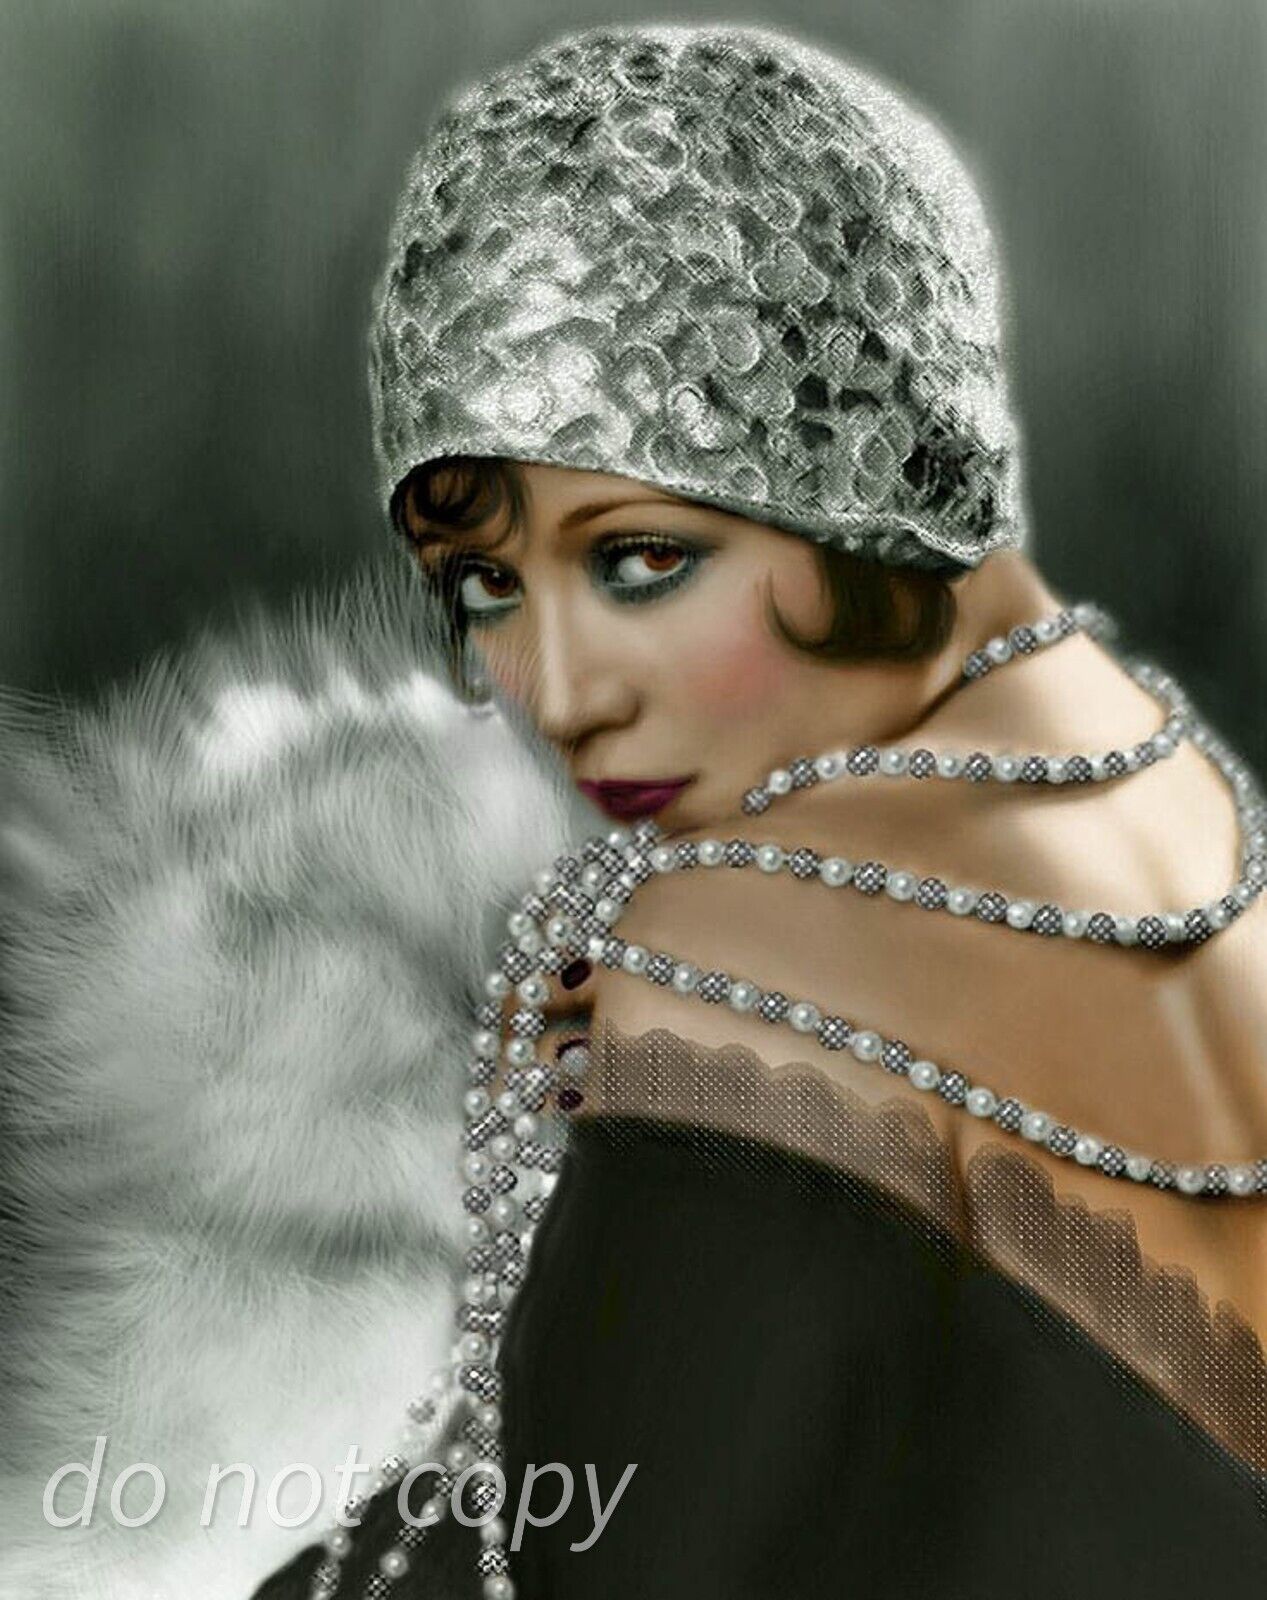 Sexy Flapper Girl   Vintage glamour   8X10 PUBLICITY PHOTO - - Flapper Girl